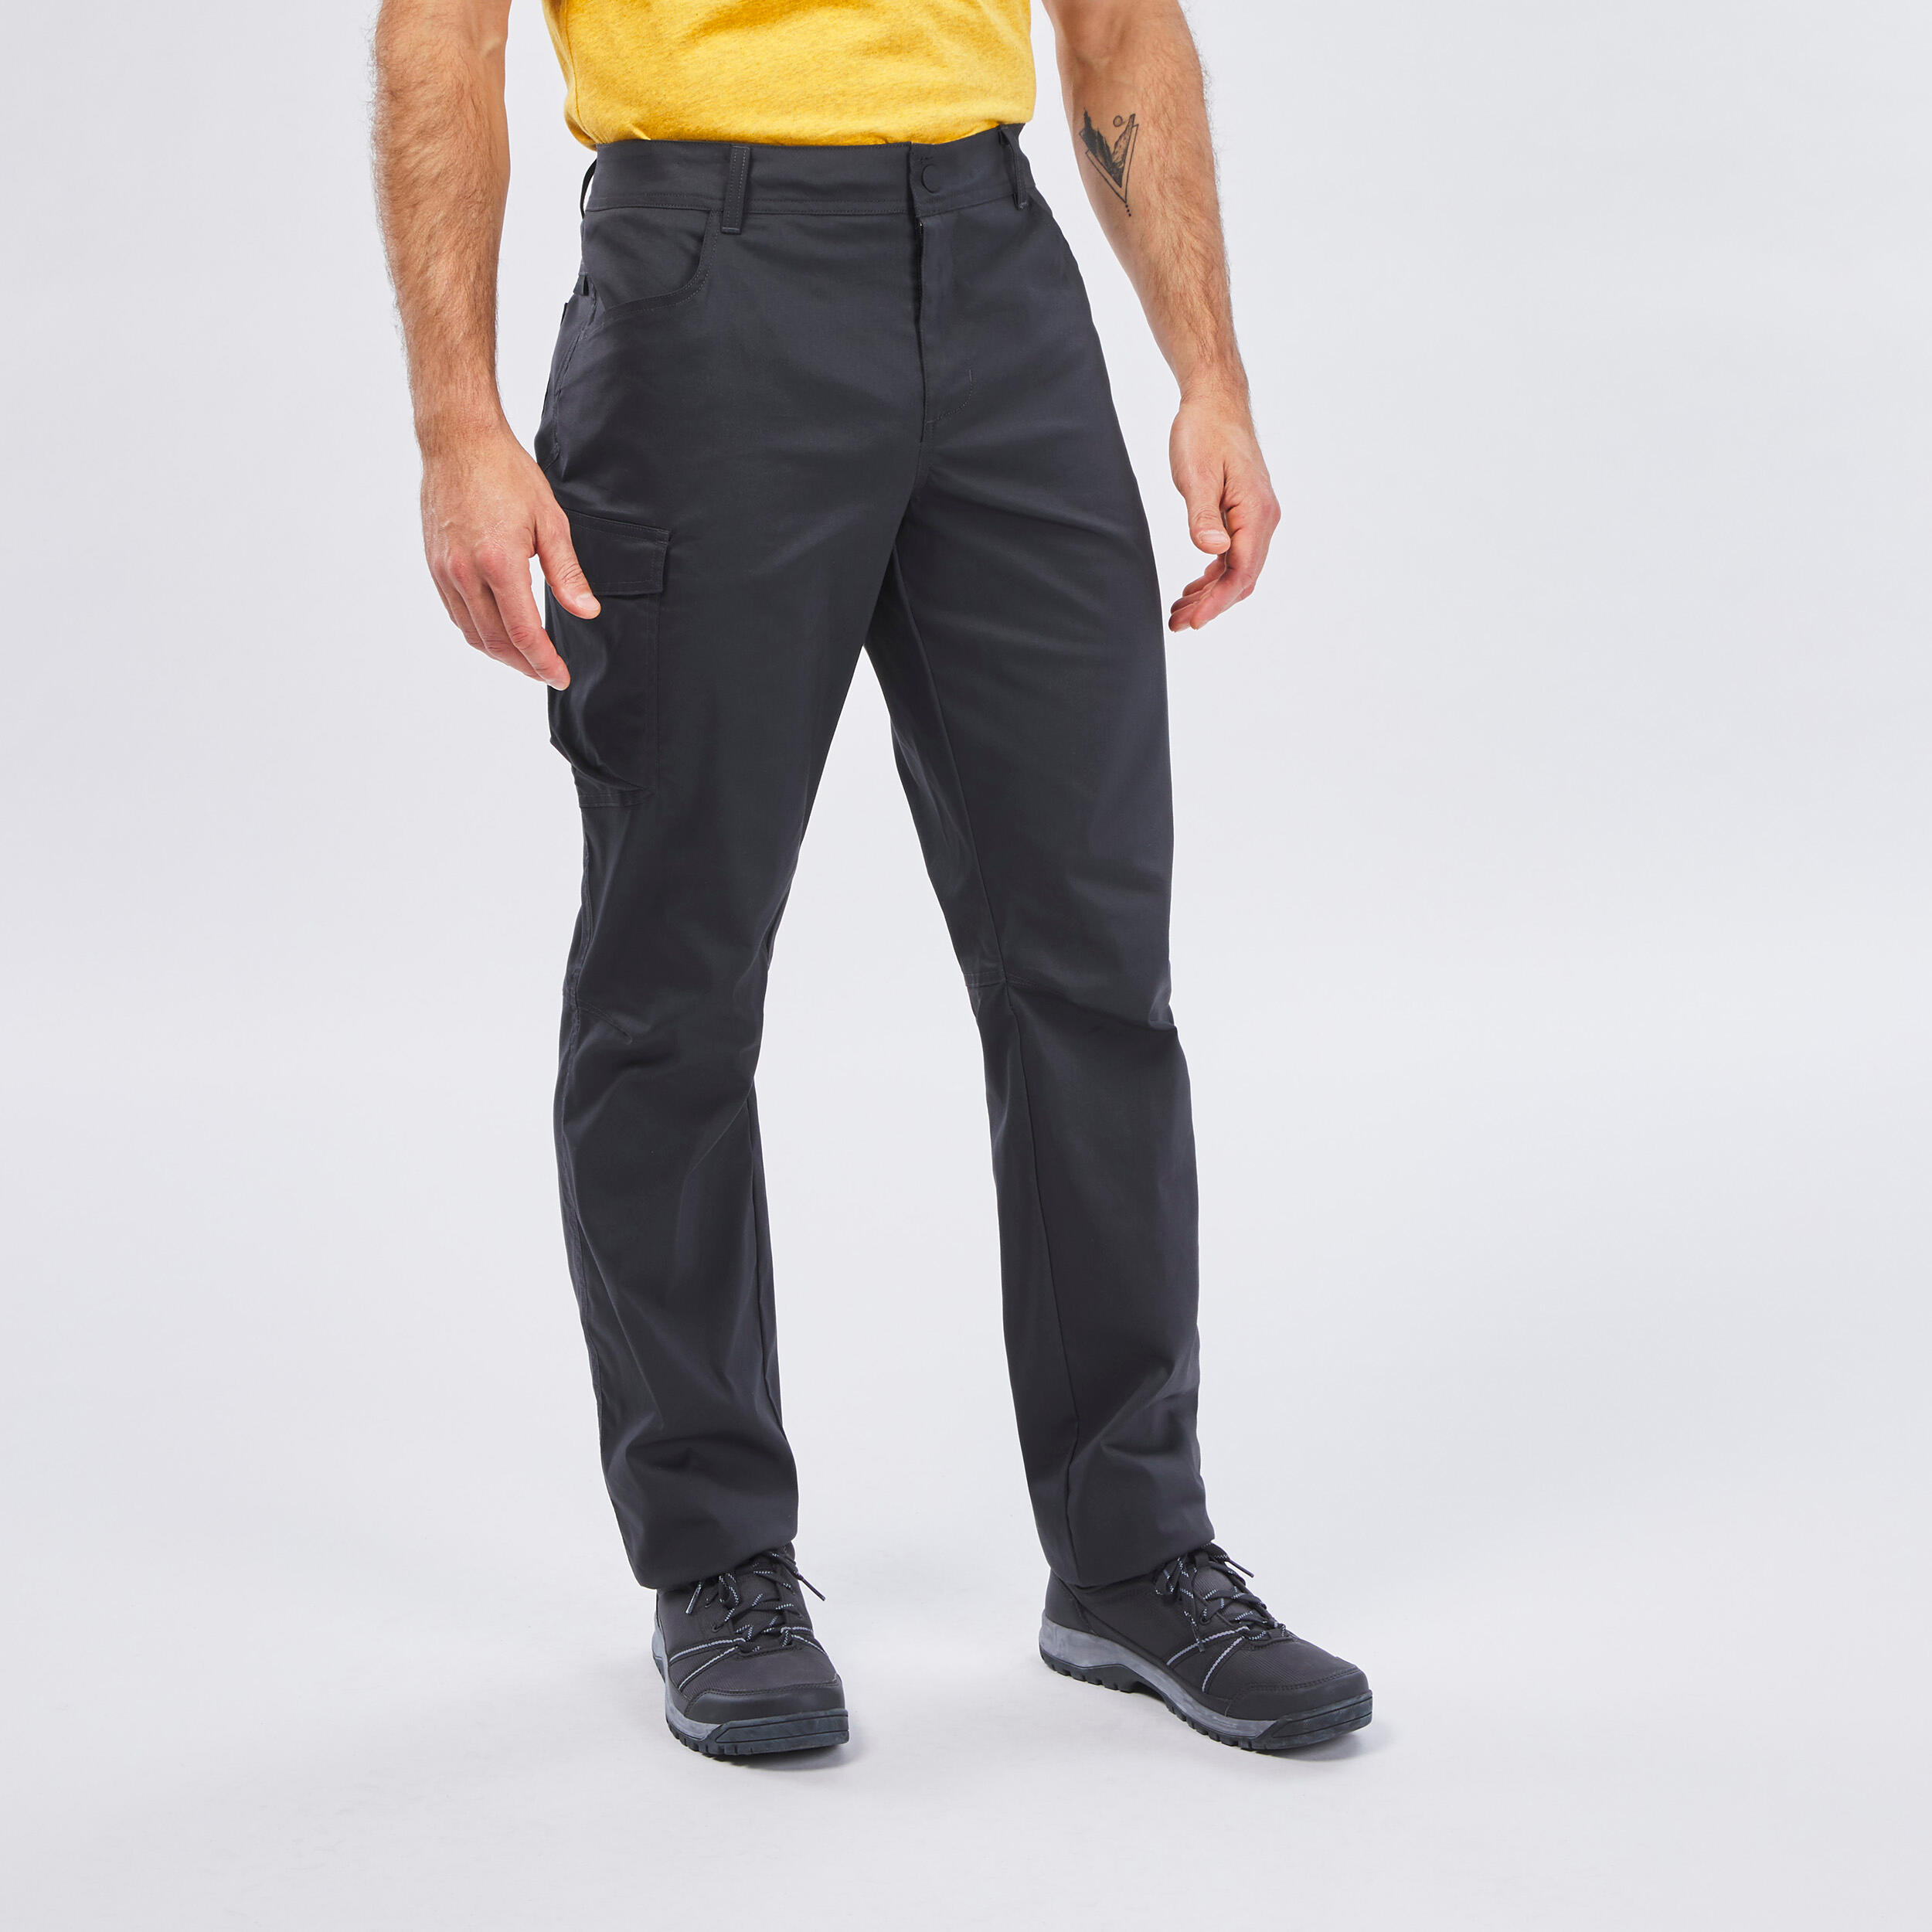 365 Work Trousers - Charcoal